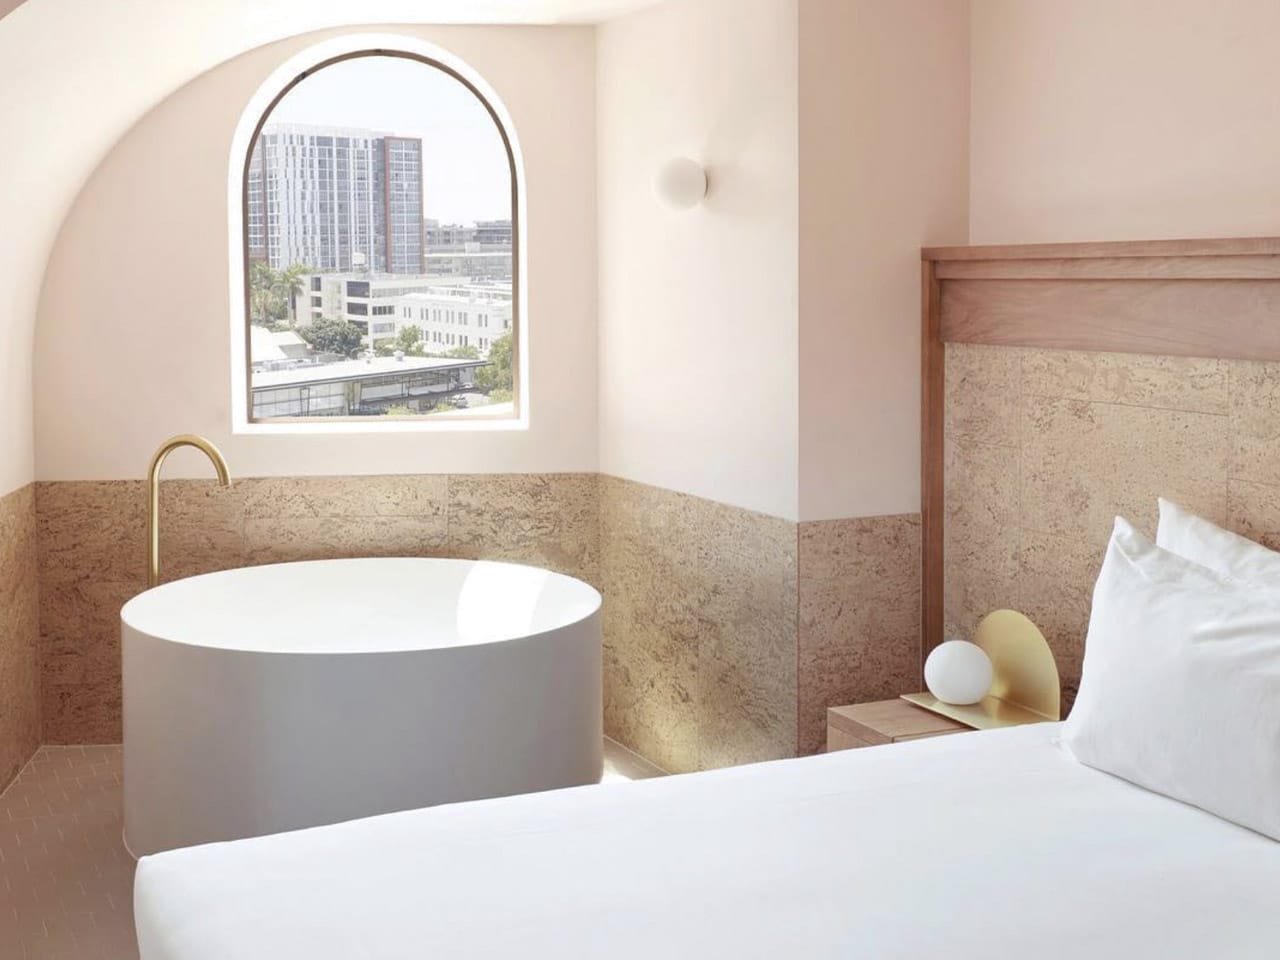 Hotel bedroom with round bath and arched window overlooking Brisbane